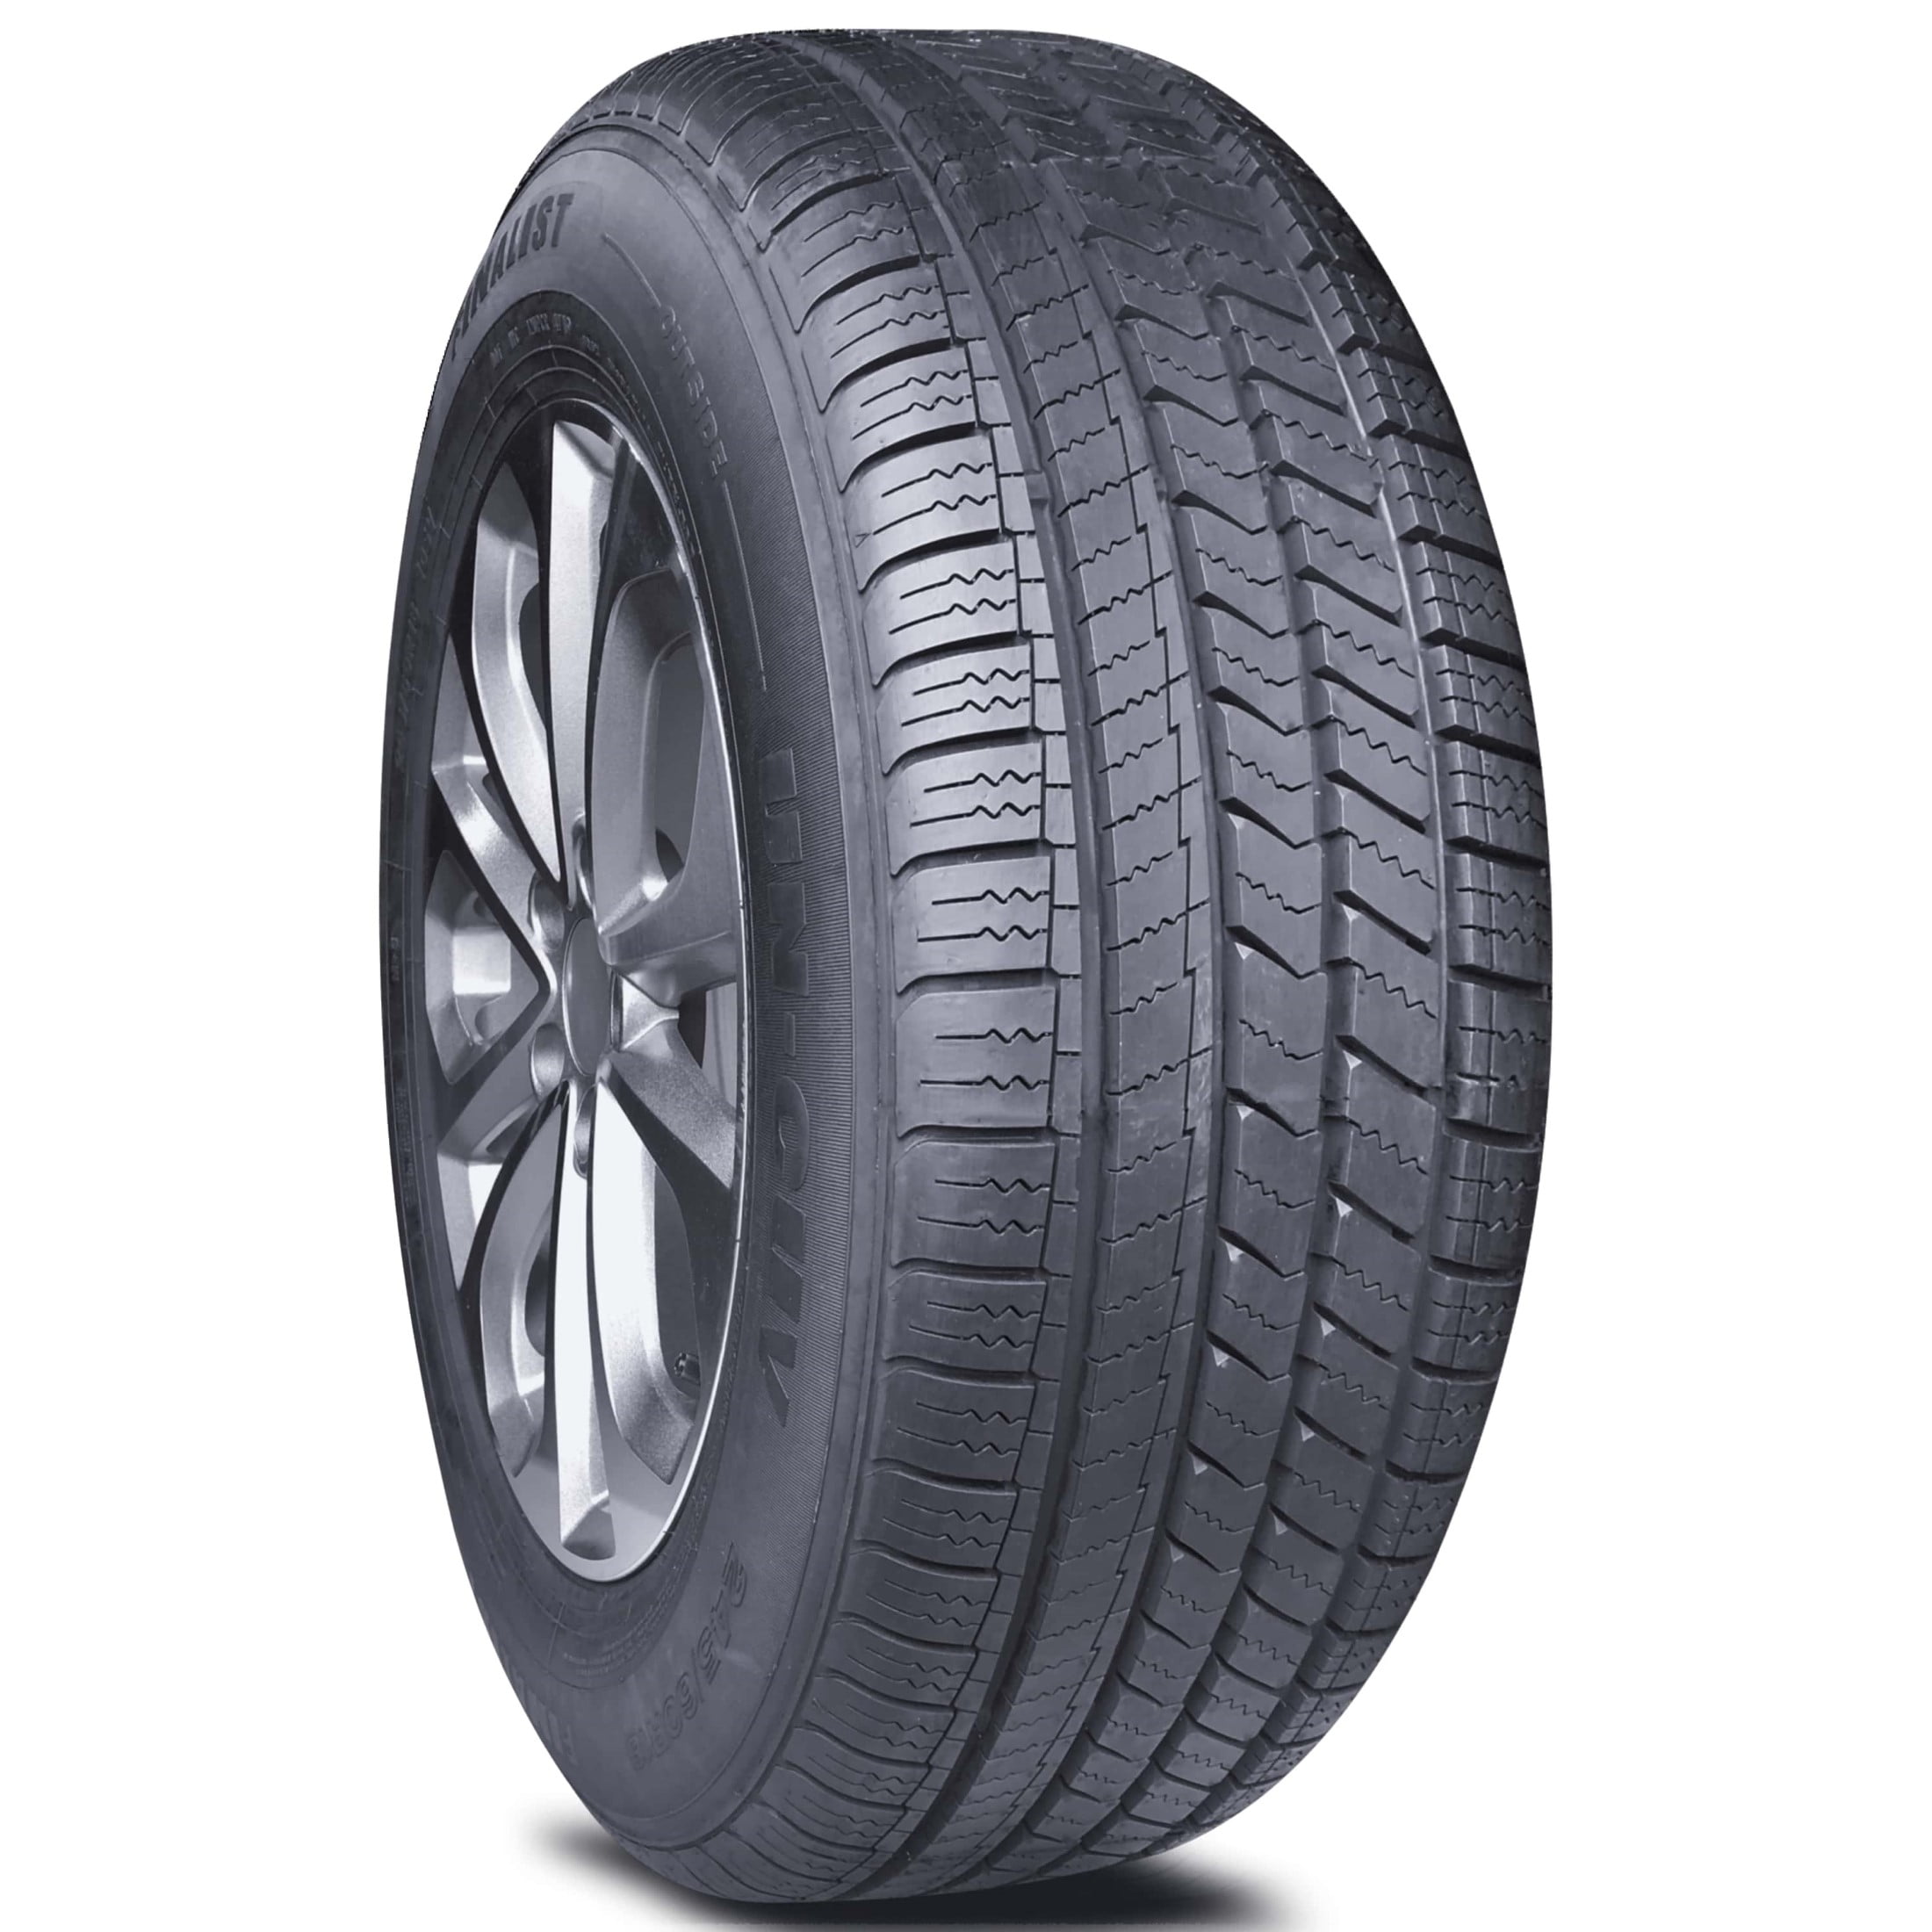 Finalist UN-CUV SUV 235/65R17 All (Tire Tire Season Only) CUV XL 235/65/17 A/S High 108V Extra Performance Load